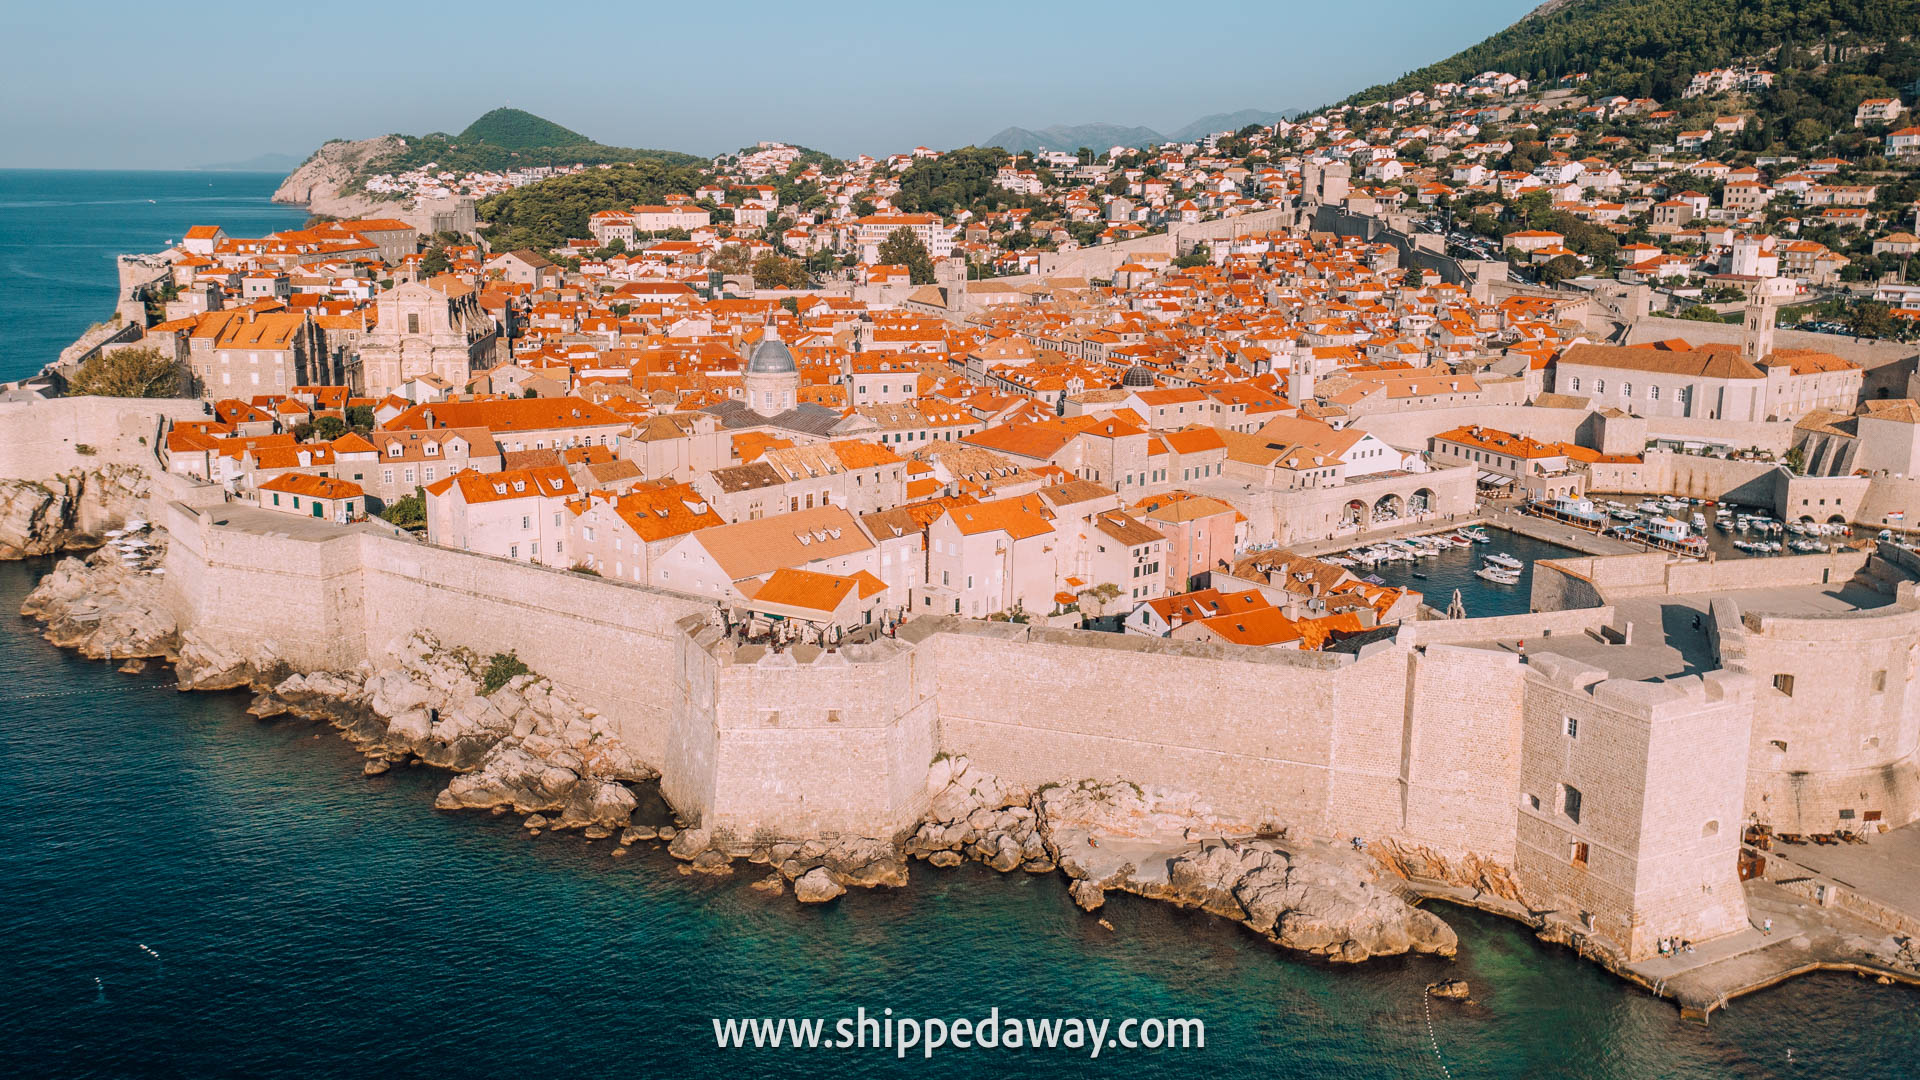 Dubrovnik City Walls - Dubrovnik Old Town - Dubrovnik Old City - Dubrovnik Old Town Things To Do - Dubrovnik Old Town Attractions